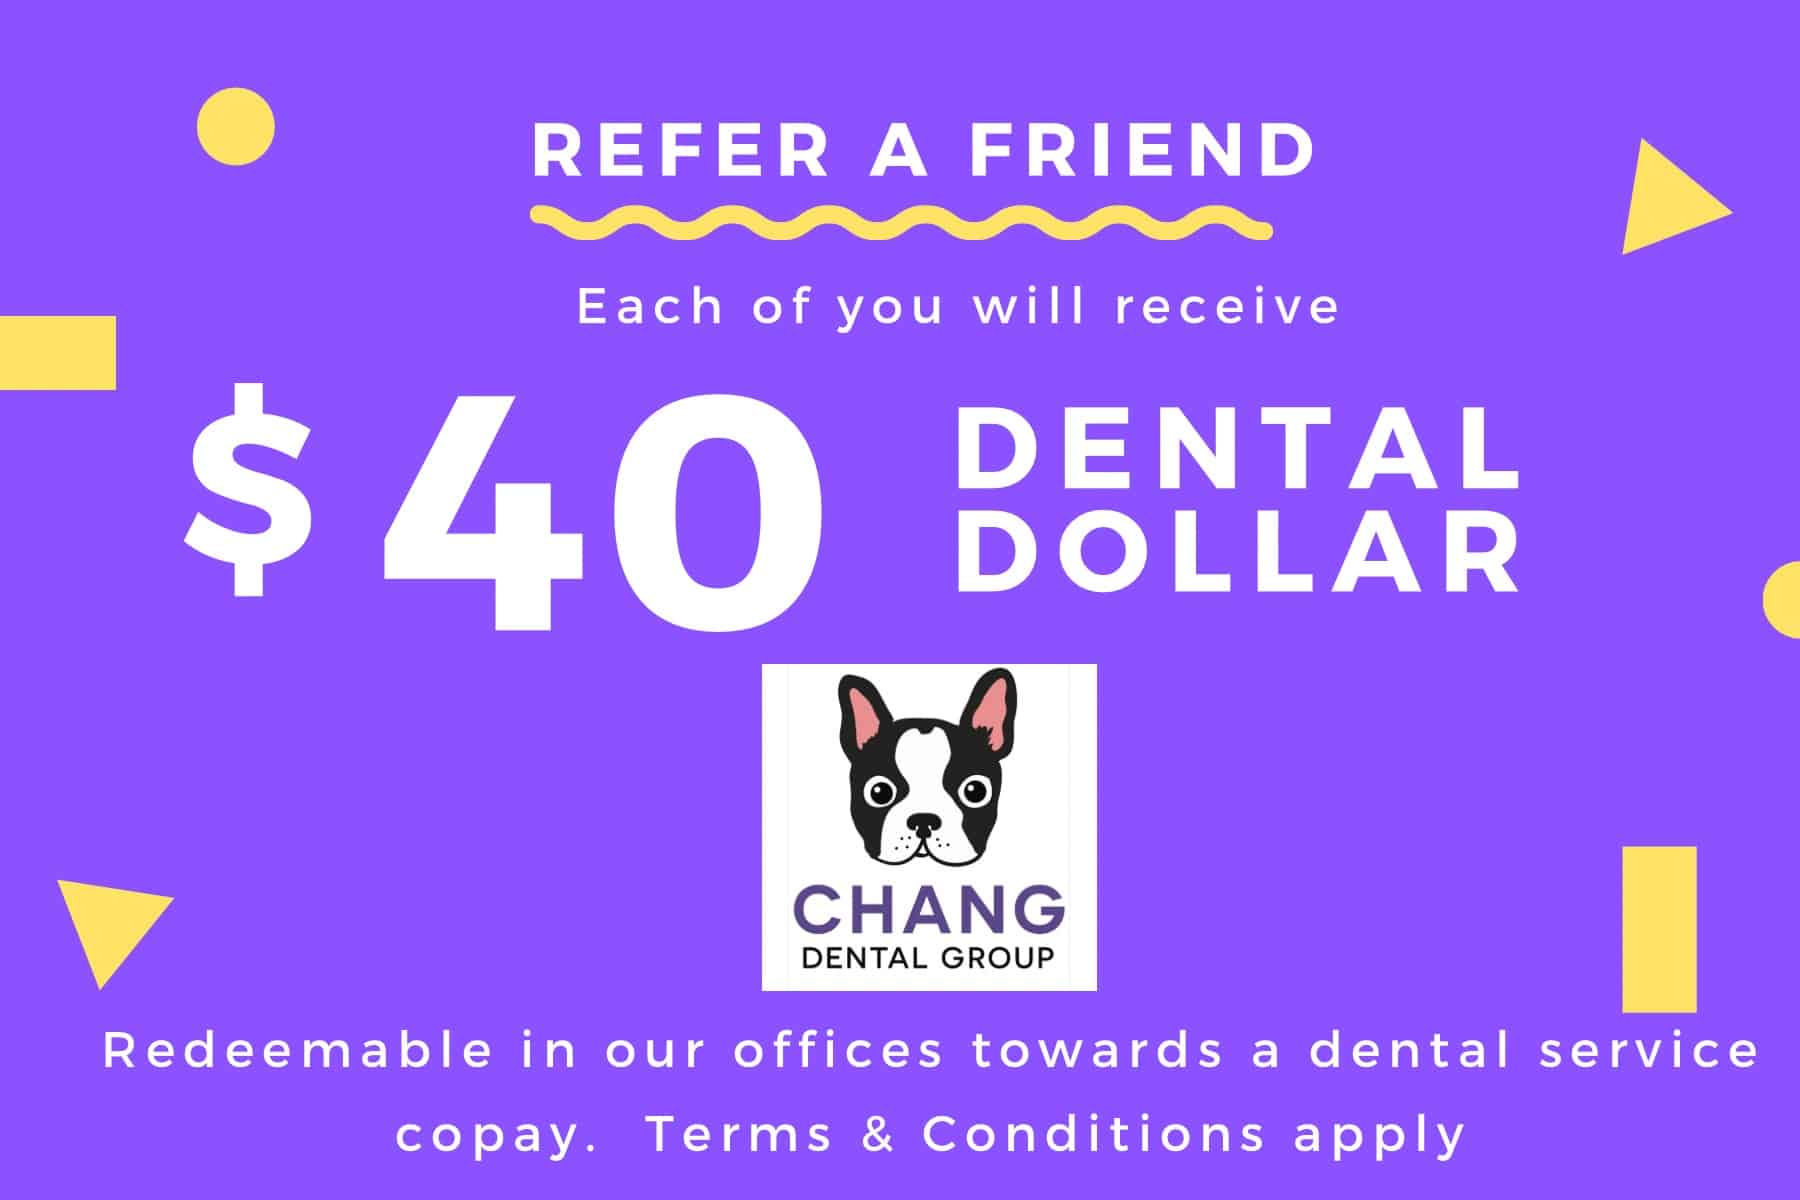 Refer a Friend - each of you will receive $40 dental dollars to use in our offices toward a dental service copay. Terms and conditions apply